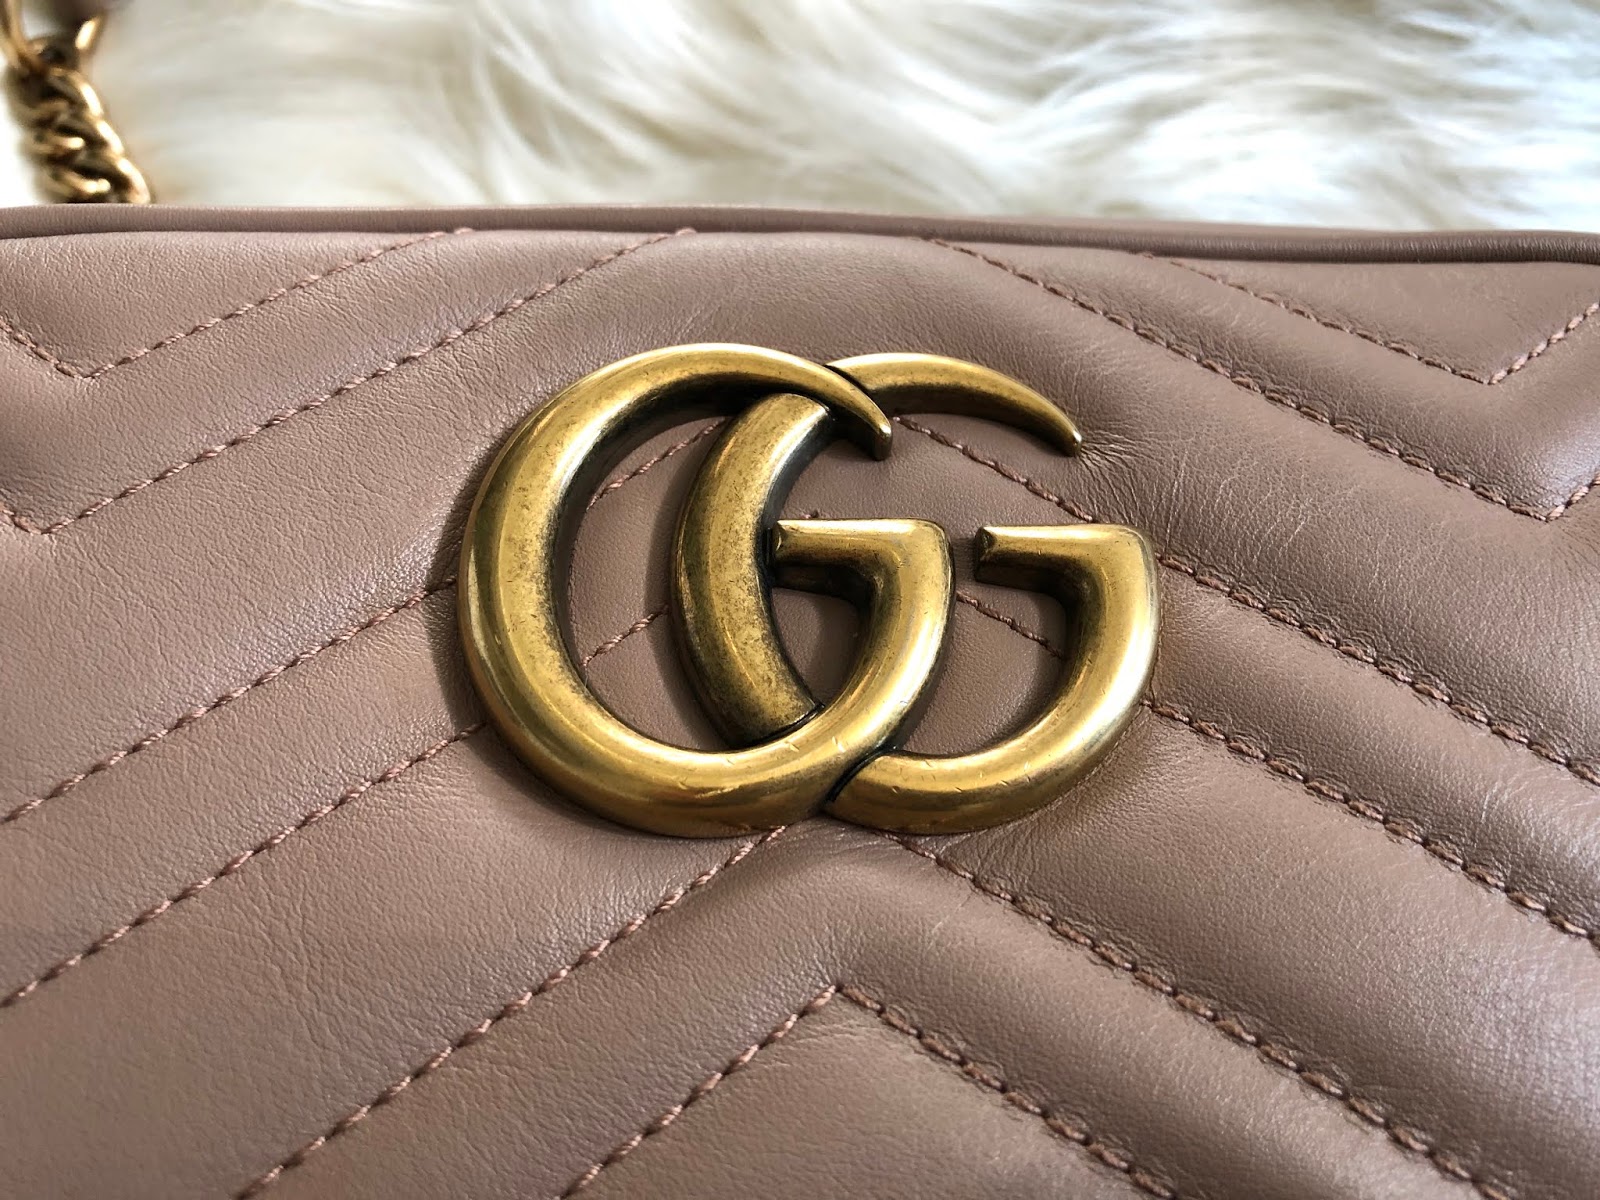 Gucci Marmont Review + why to invest in a designer bag - Pines and Palms